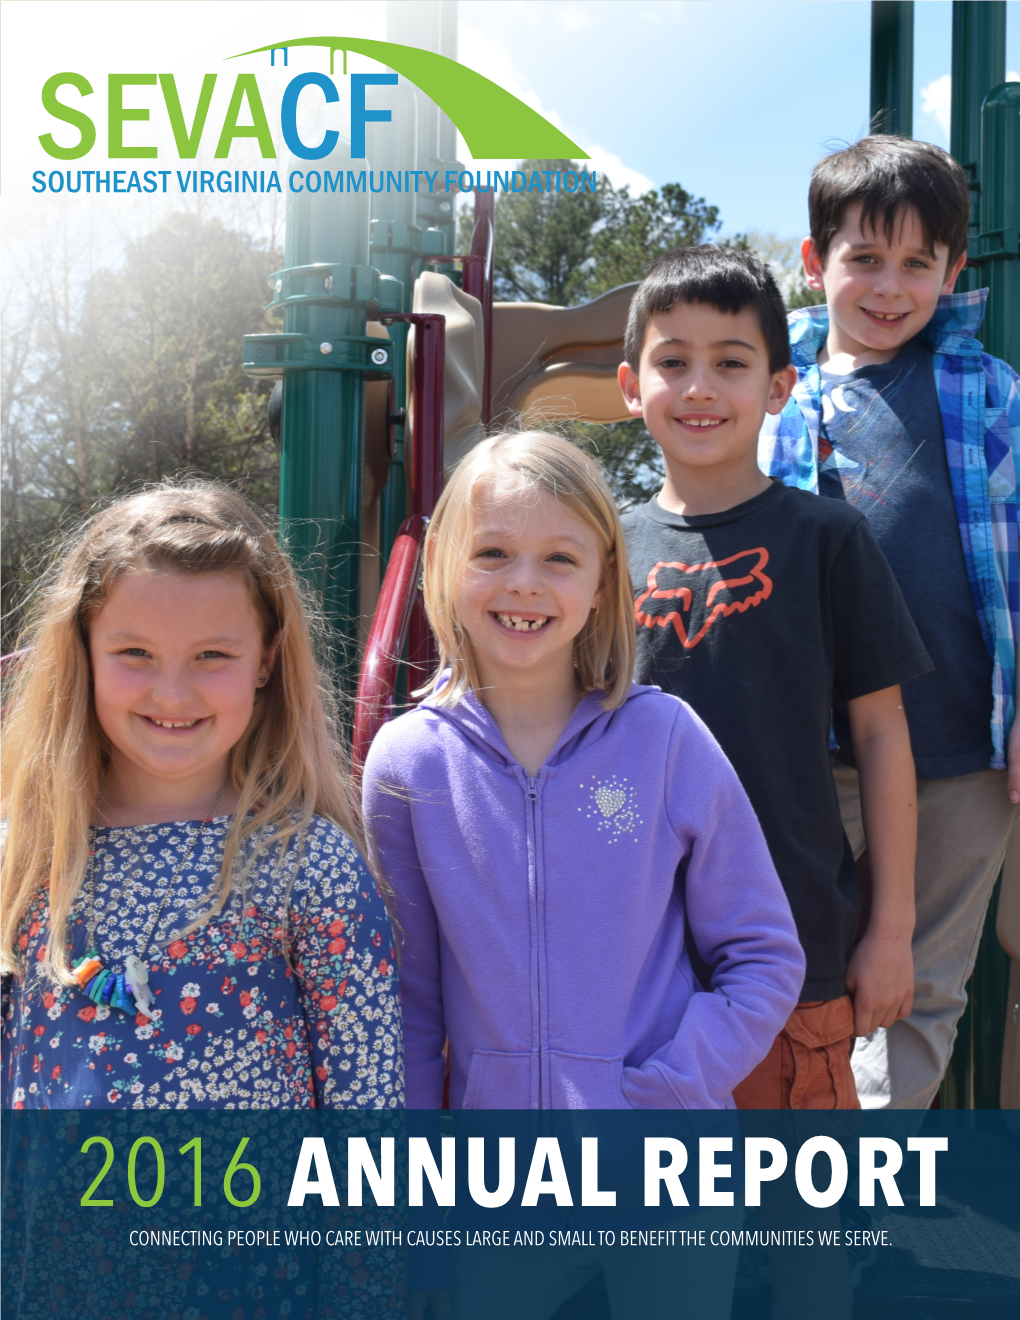 2016 Annual Report Connecting People Who Care with Causes Large and Small to Benefit the Communities We Serve